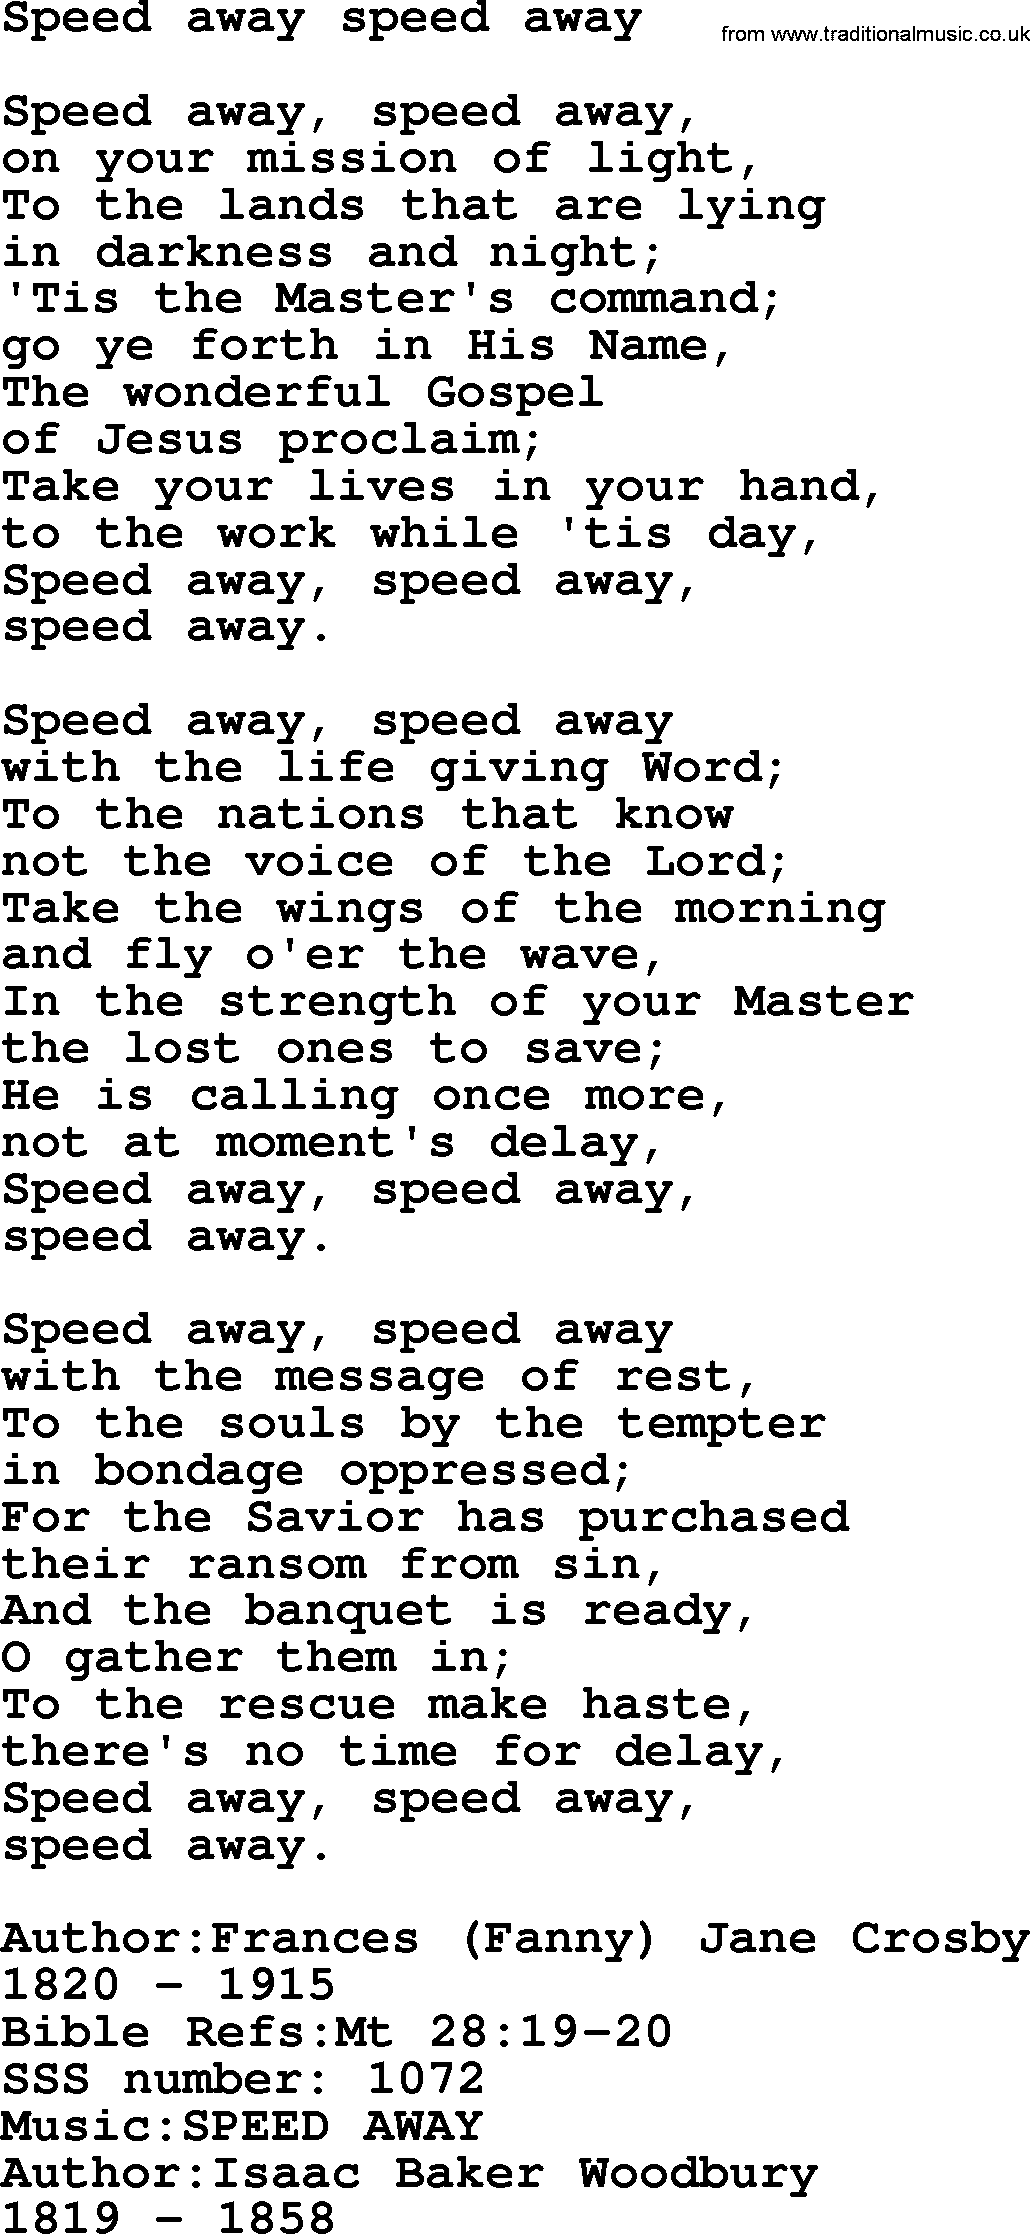 Sacred Songs and Solos complete, 1200 Hymns, title: Speed Away Speed Away, lyrics and PDF